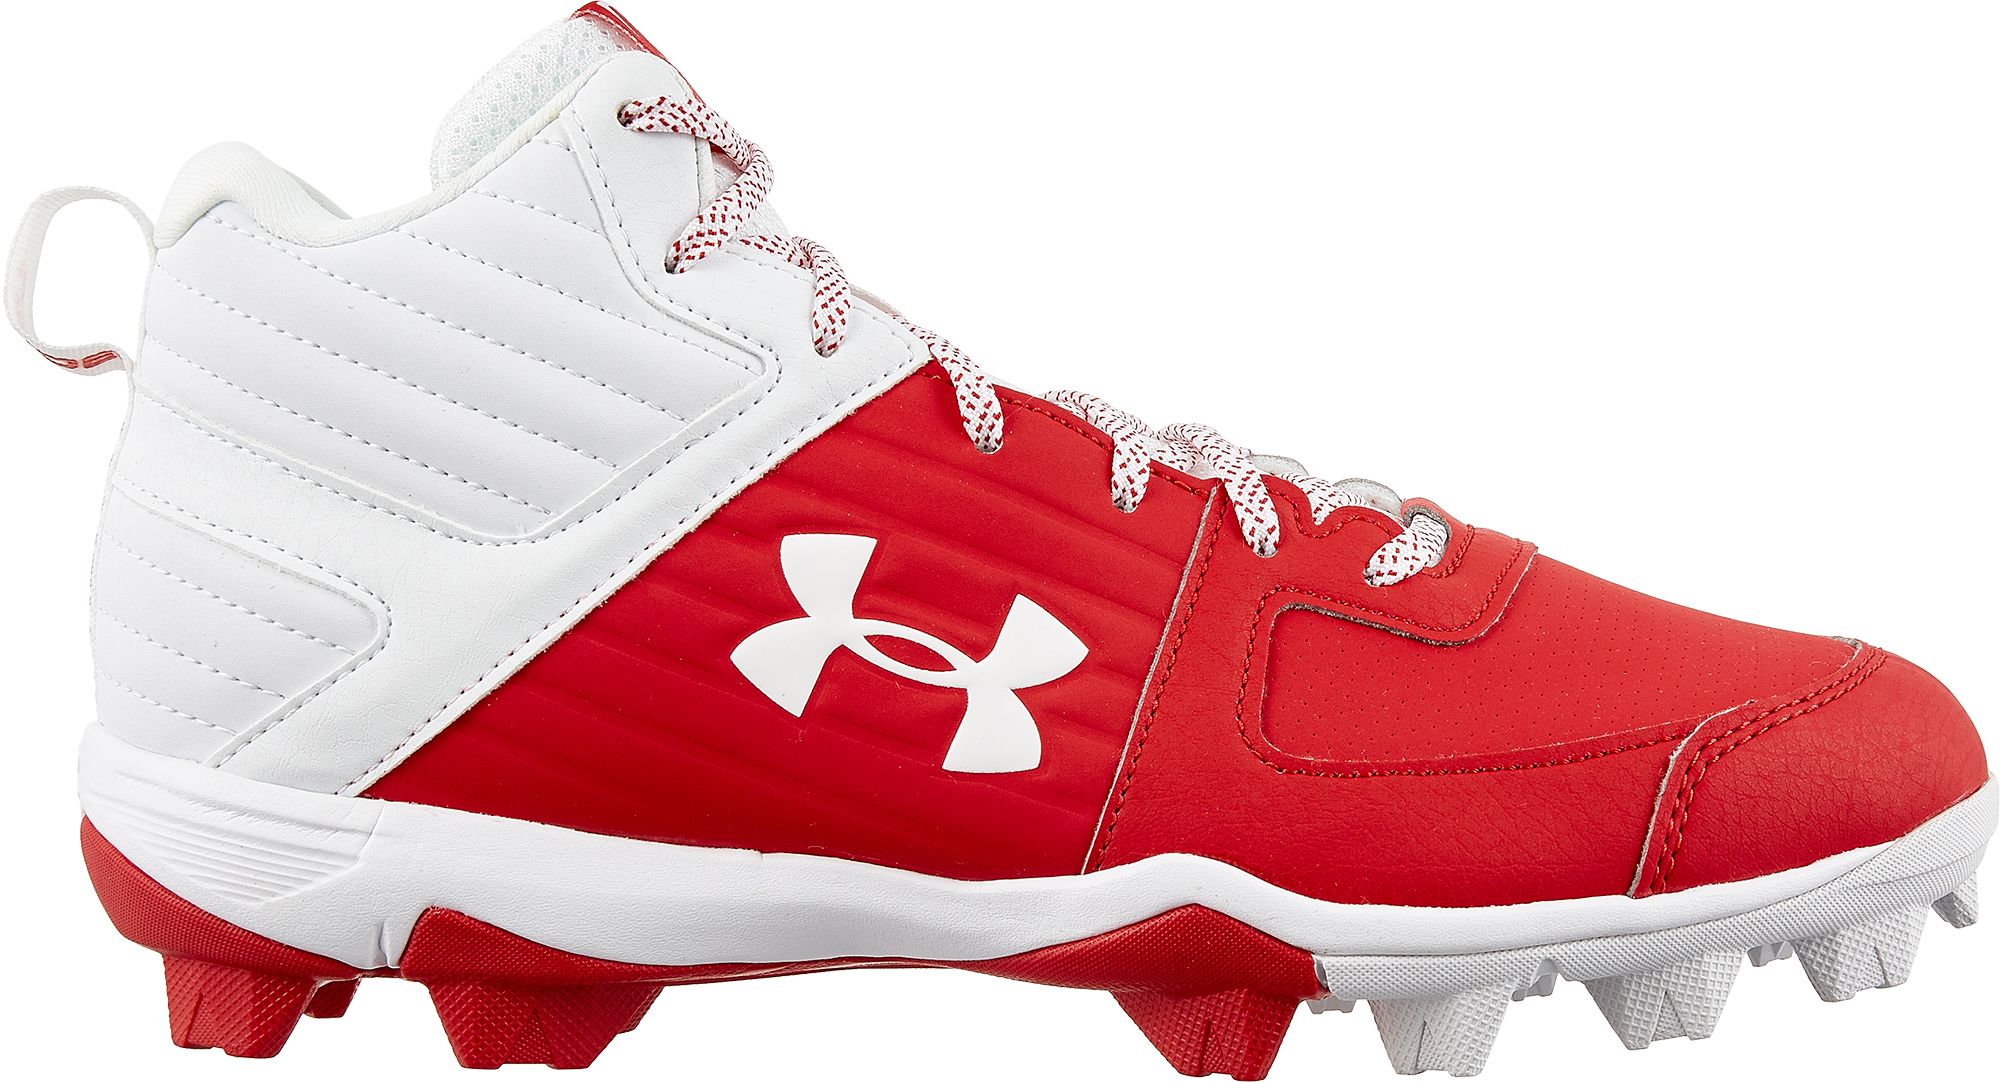 Men's Red Baseball Cleats | Best Price Guarantee at DICK'S